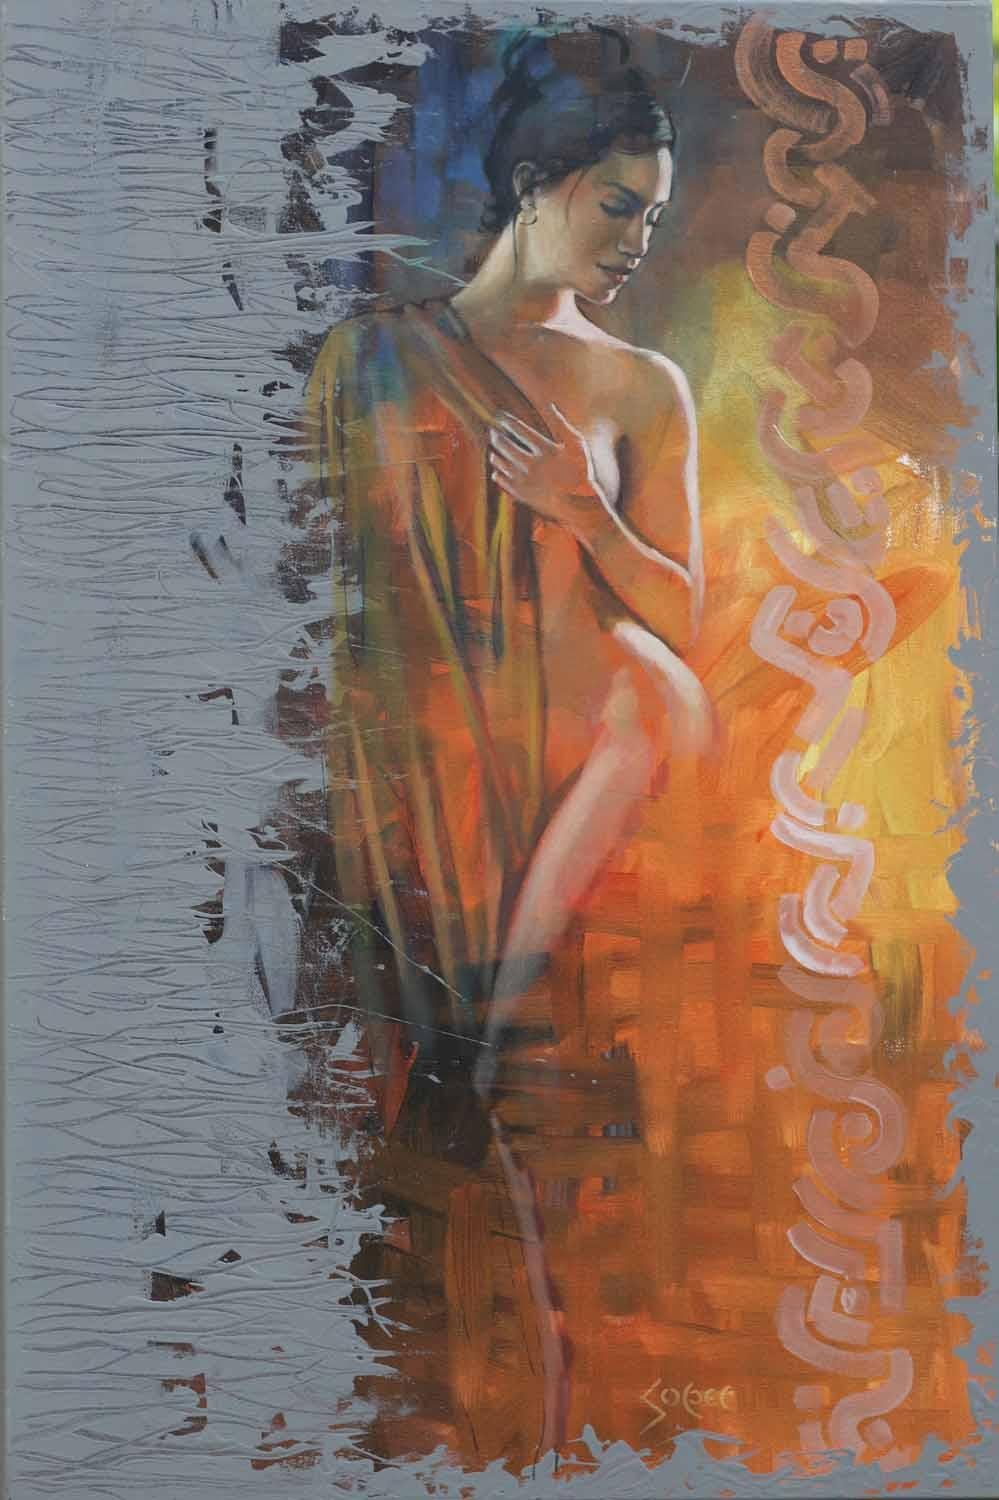 Fire Poetry, Original Painting - Mixed Media Art by Patrick Soper